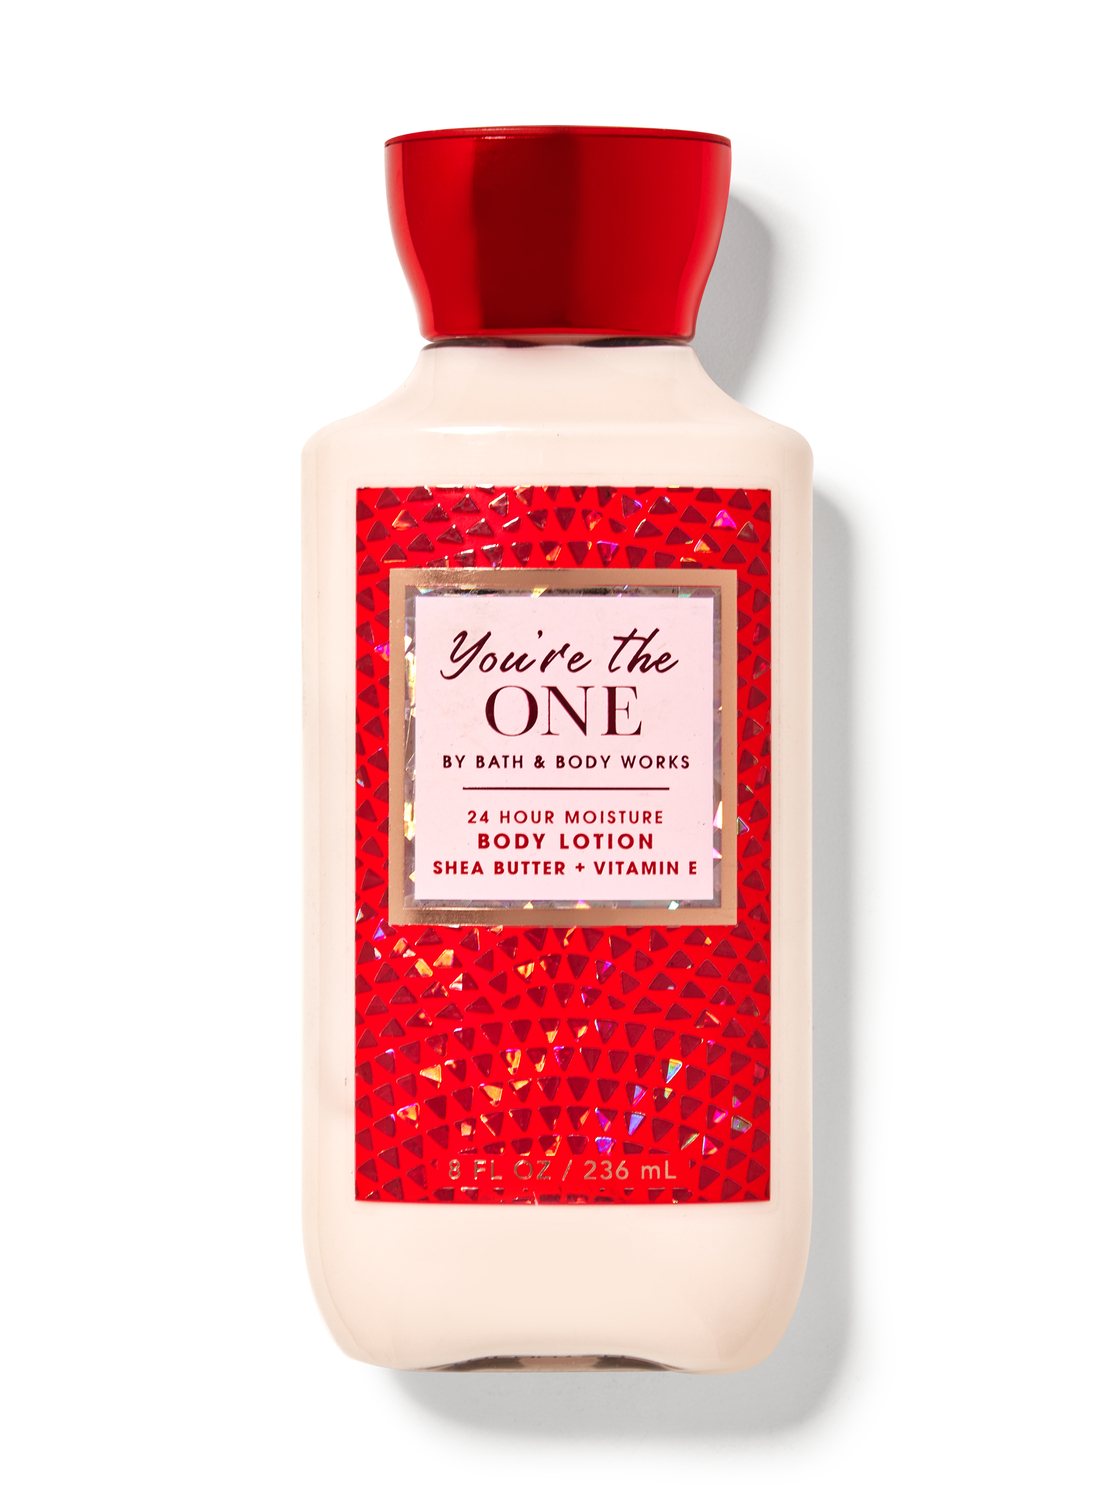 You're the One Body Lotion Bath & Body Works Australia Official Site